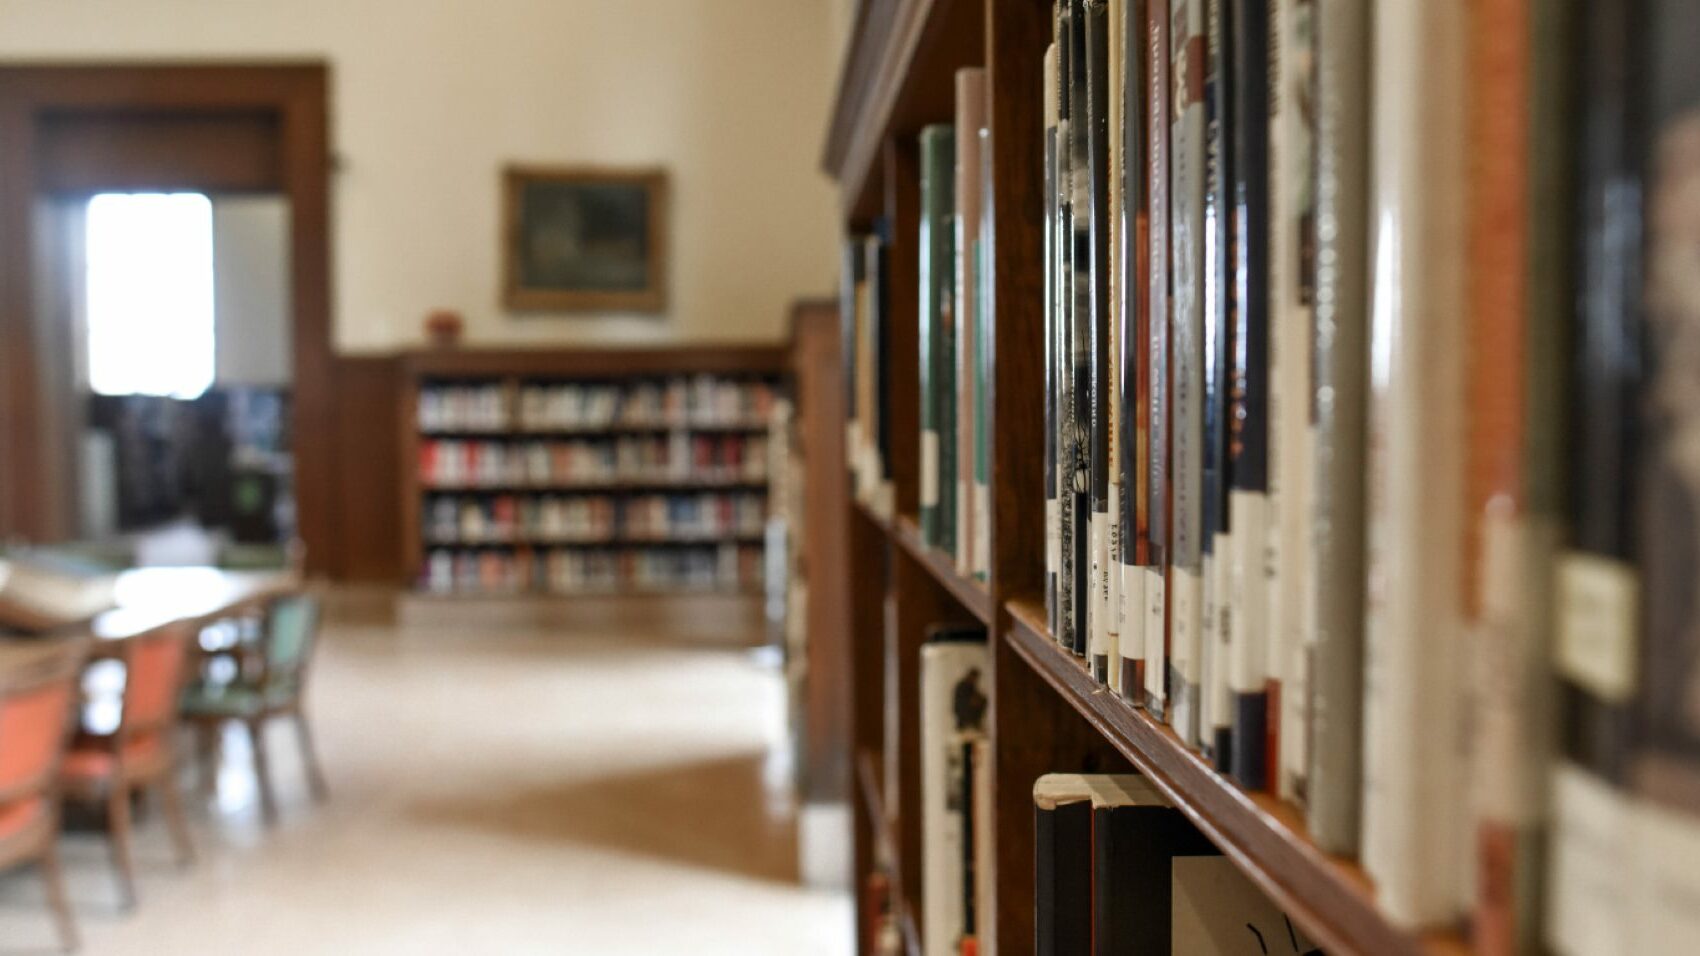 Close up Image of Books in a Library